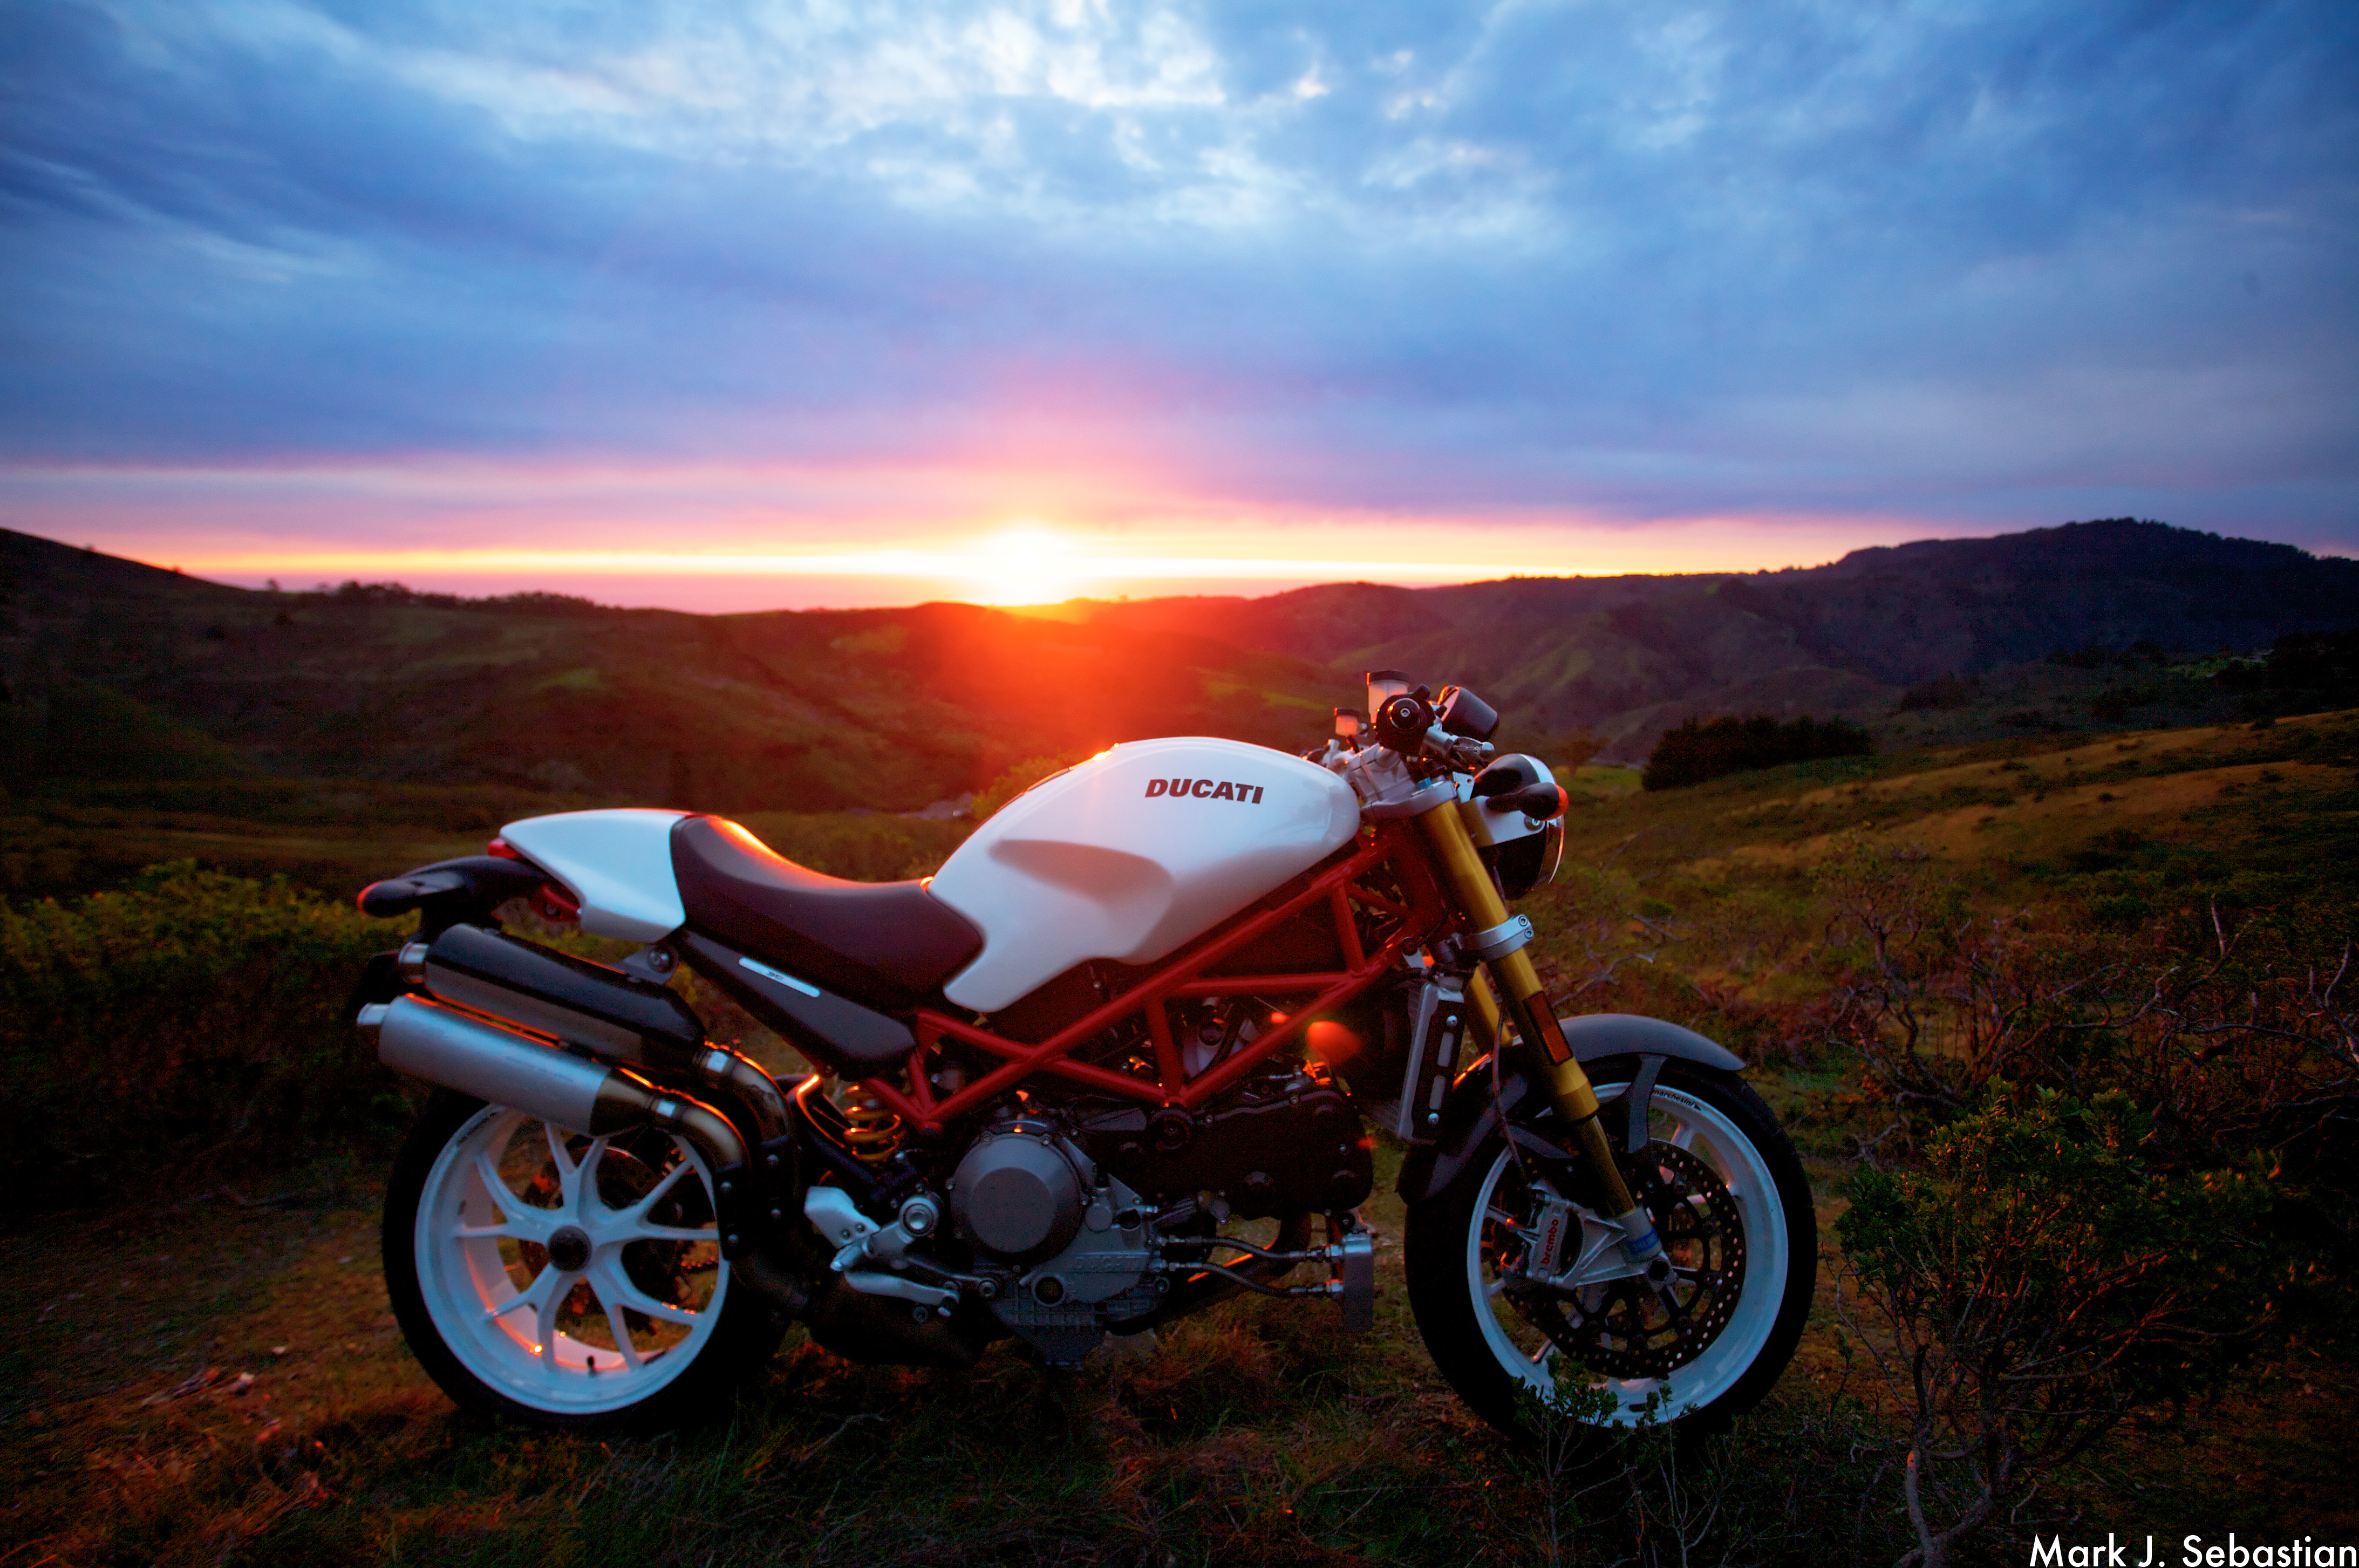 1920x1080 Background ducati, sunset, motorcycles, motorcycle, sunlight